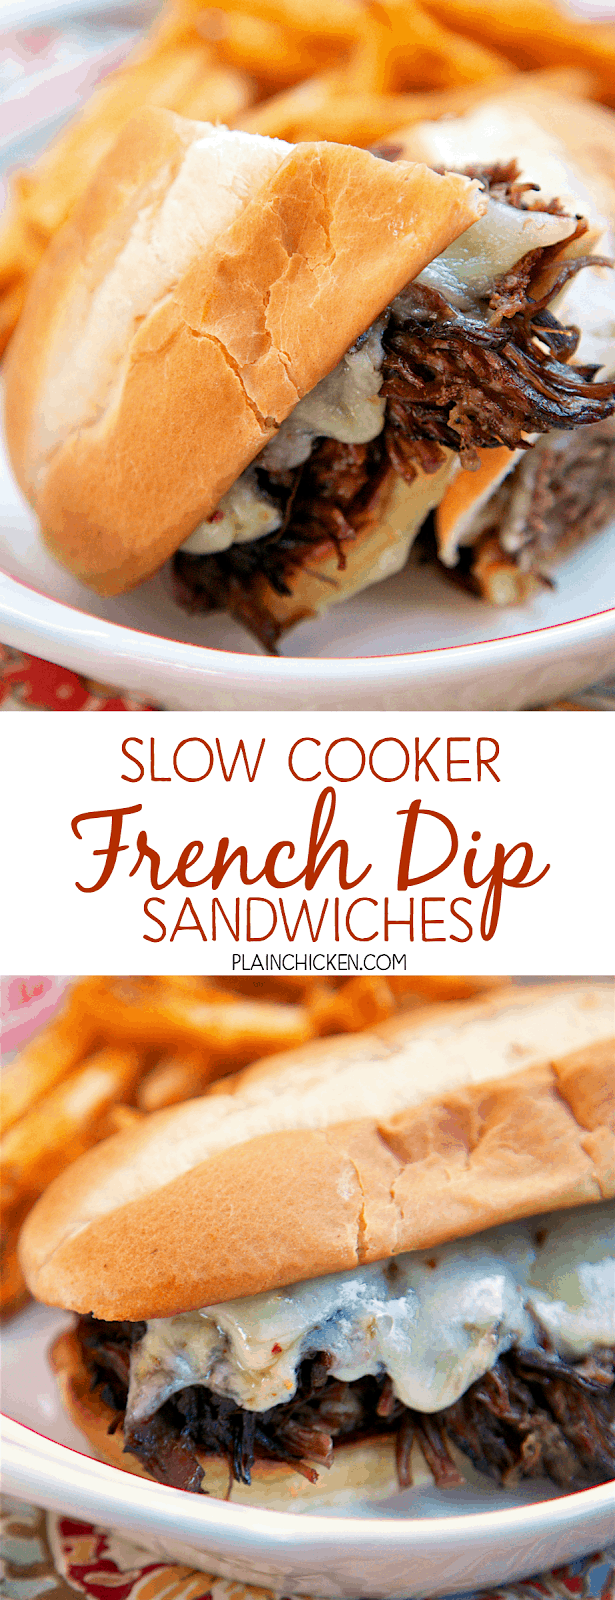 Slow Cooker French Dip Sandwiches - slow cook chuck roast in a mixture of soy sauce, beef broth, onion, garlic, rosemary, thyme and pepper. Serve on toast buns with melted pepper jack cheese. These sandwiches are SO good! I think they are the PERFECT French Dip Sandwiches!